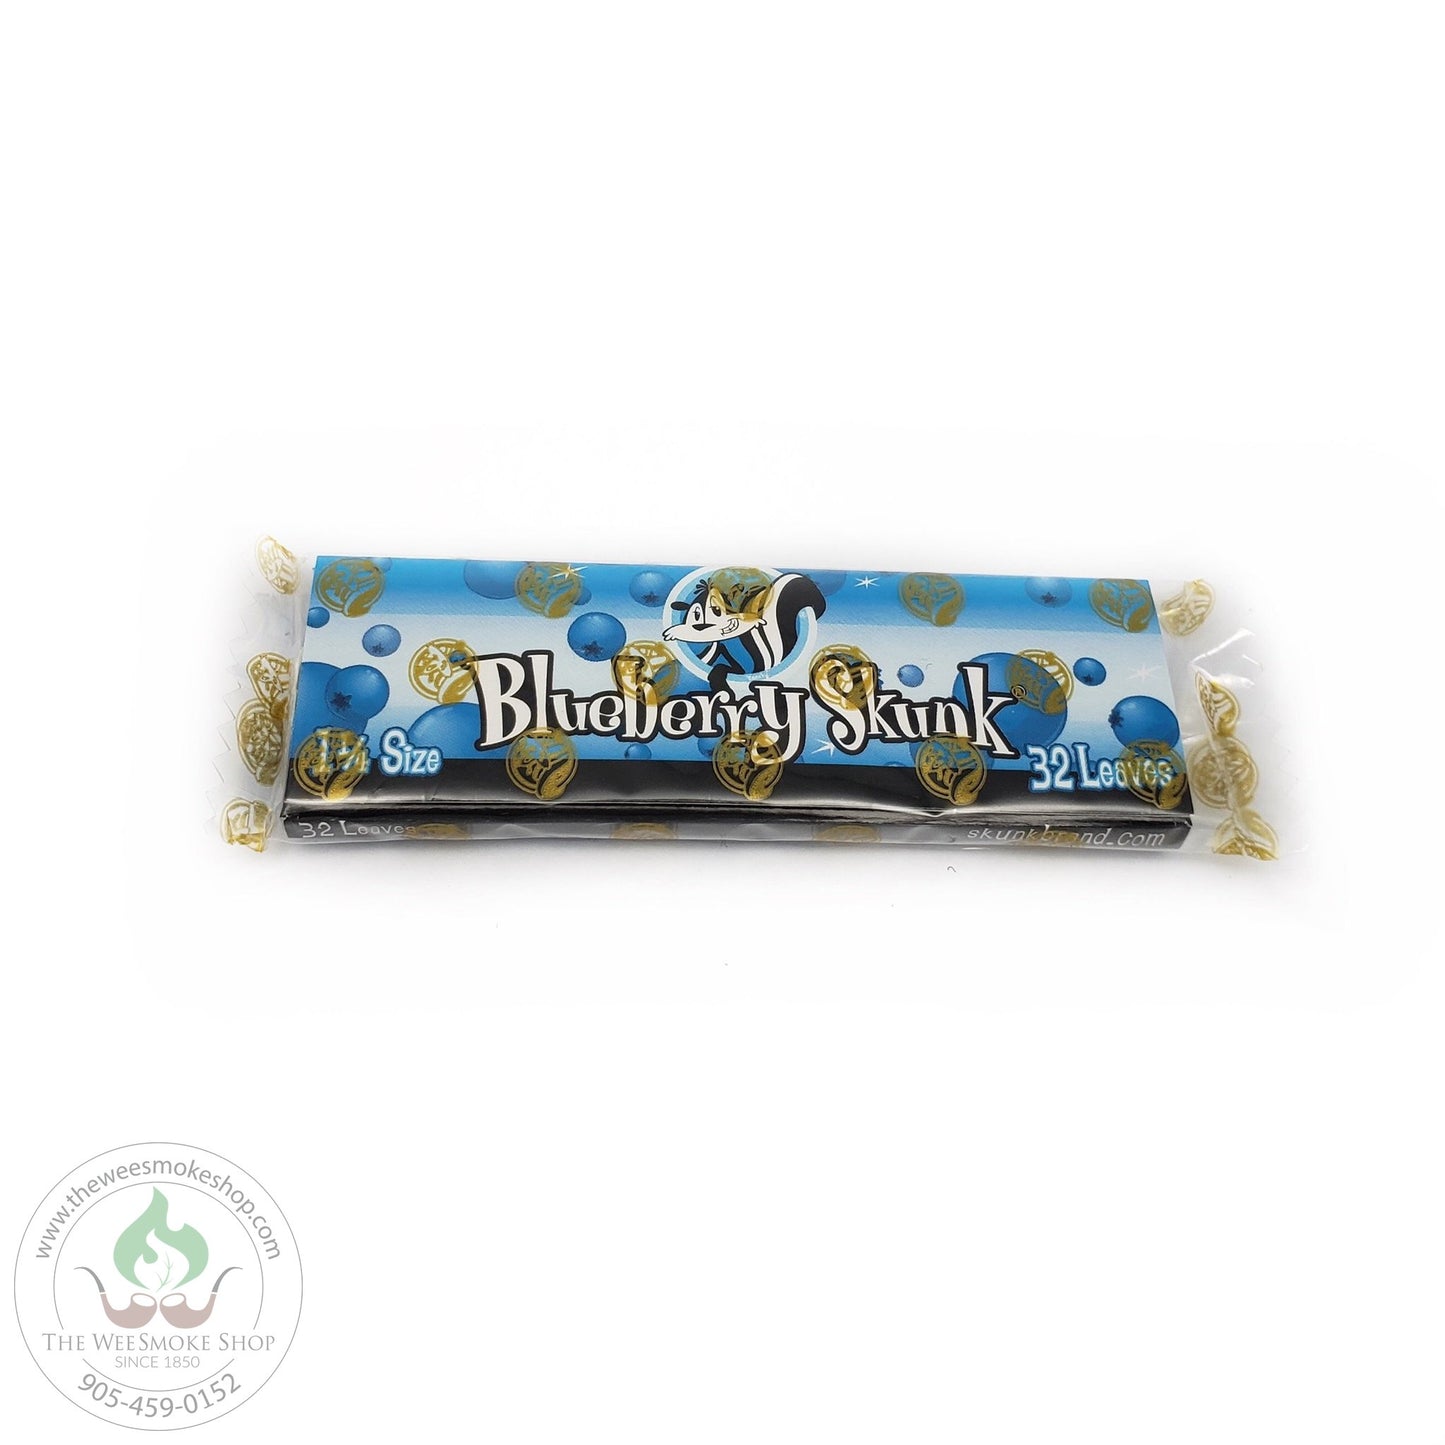 Skunk Brand 1 1/4 Size Flavoured Papers. Blueberry. 1 1/4 size. 32 Leaves per pack. The Wee Smoke Shop